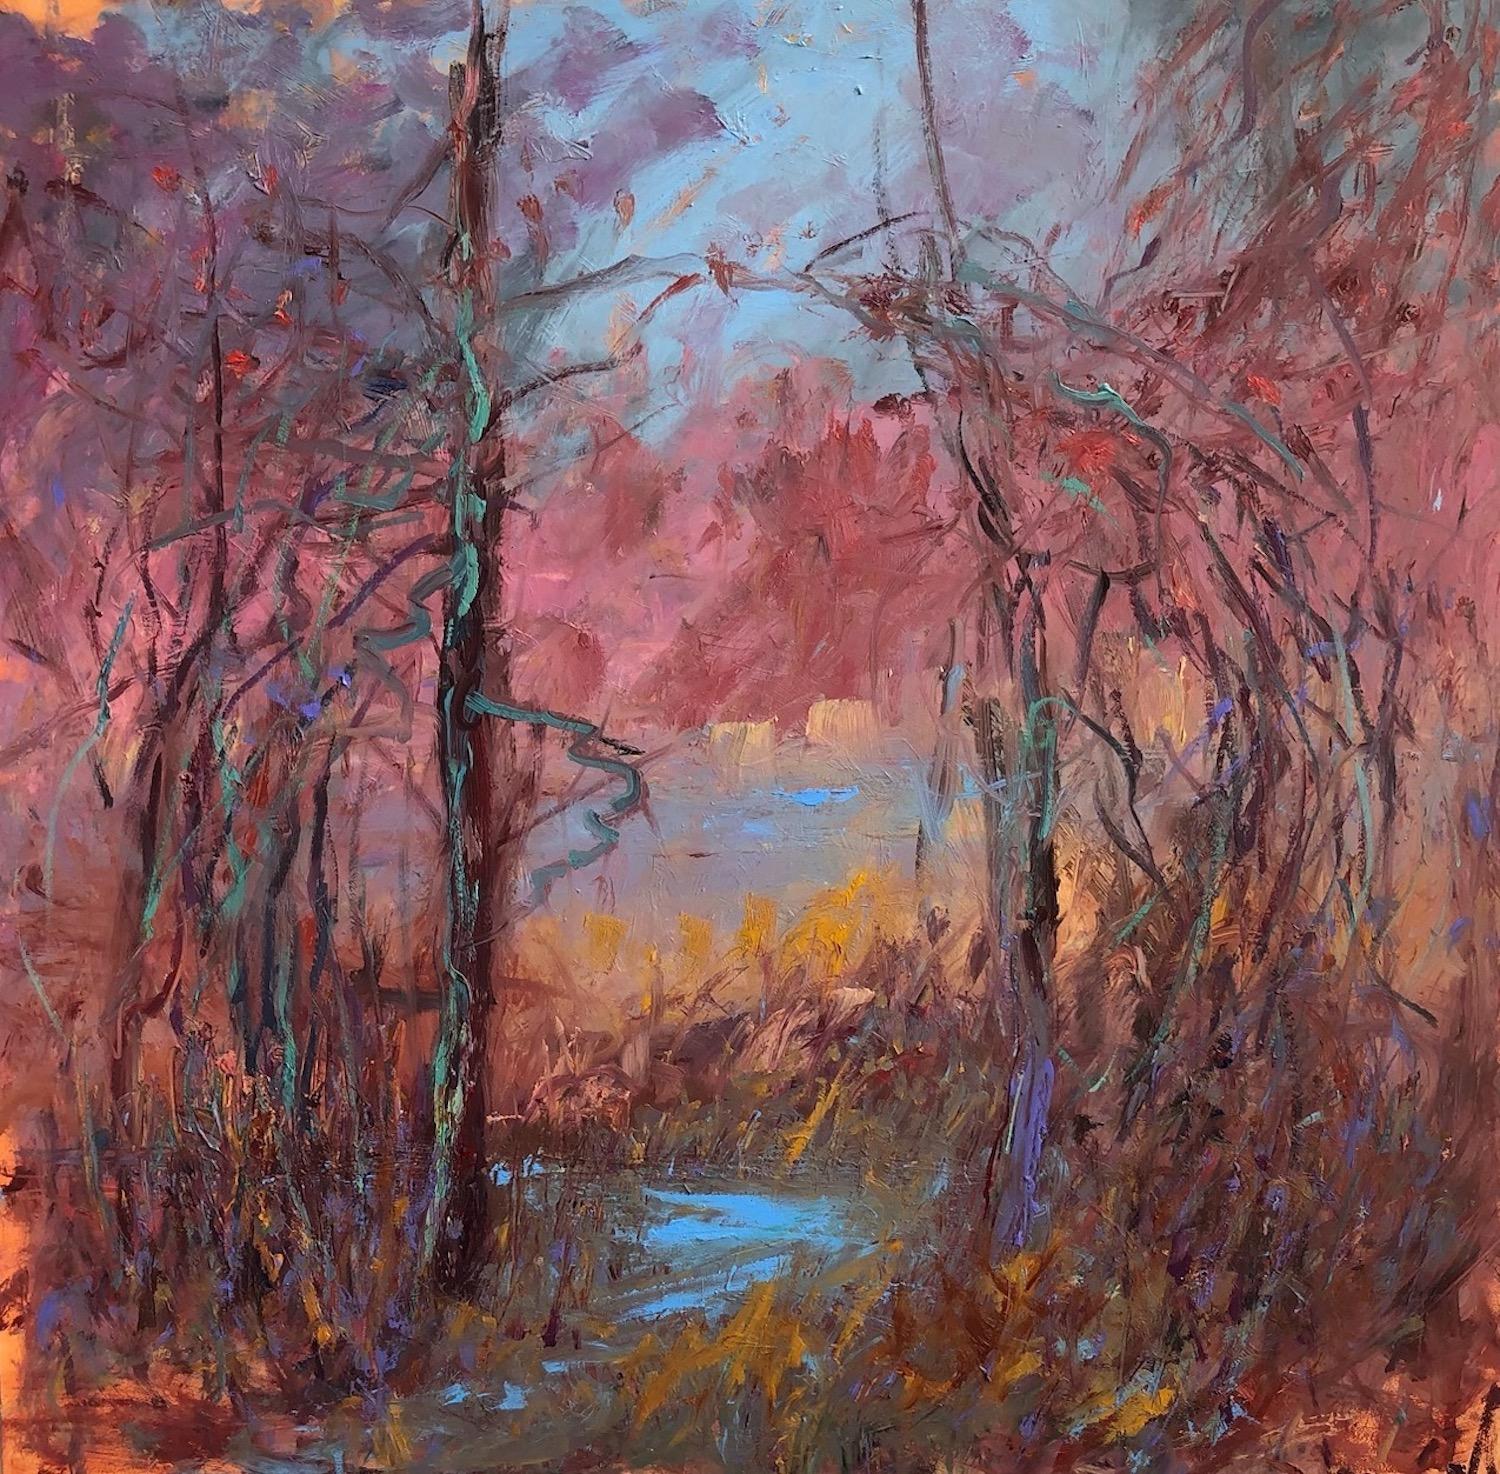 "Ingress", expressionist, trees, pink, purple, blue, yellow, ochre, oil painting - Painting by Catherine Picard-Gibbs